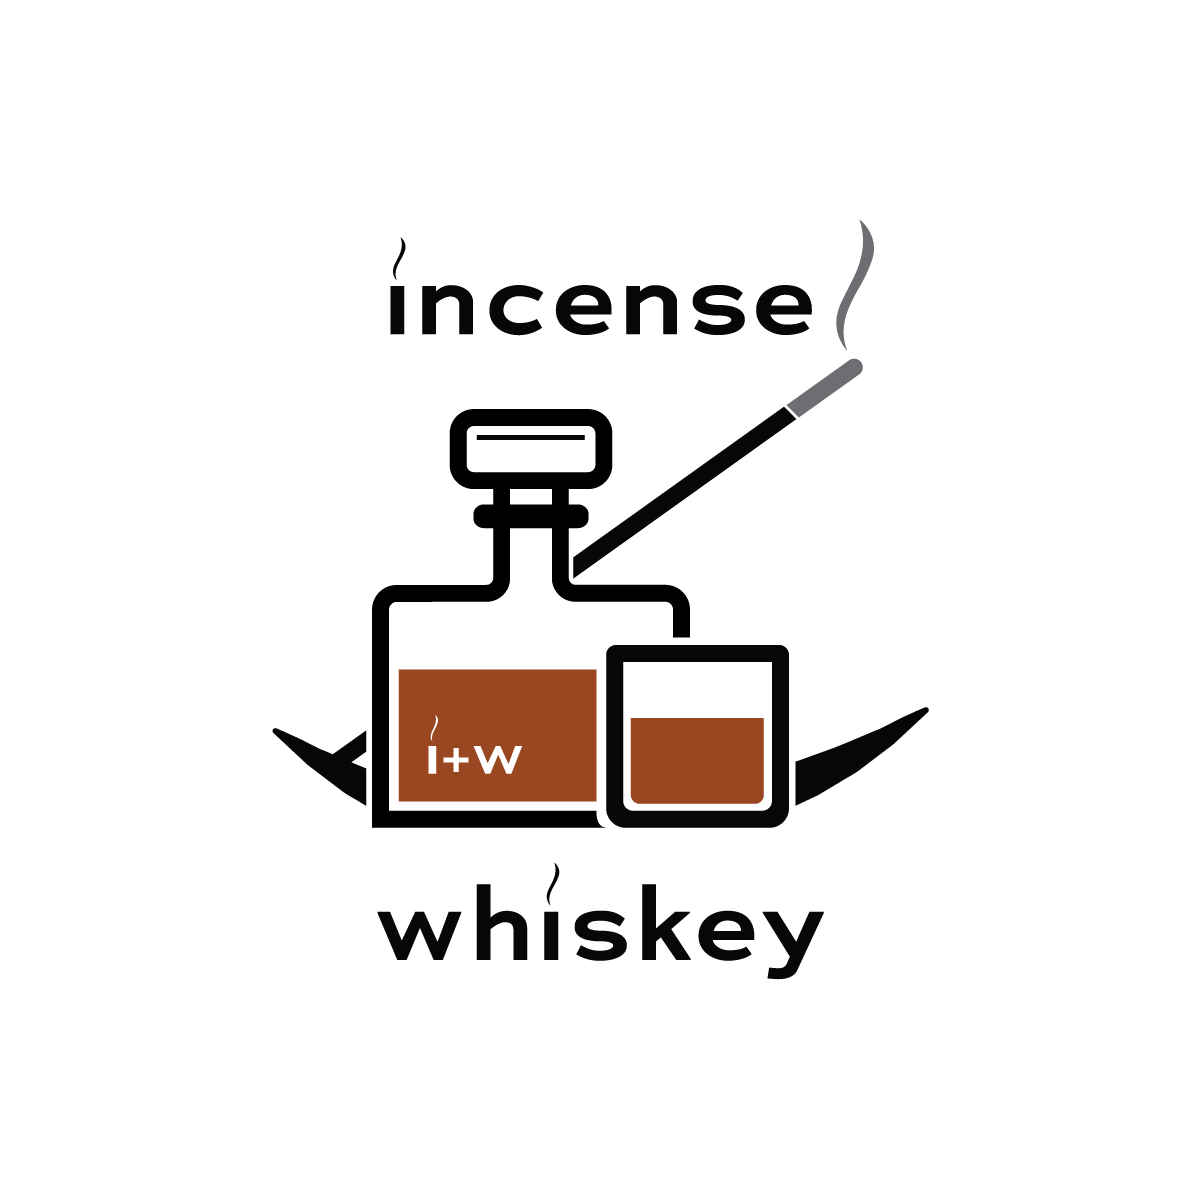 Incense+Whiskey-FINAL-01.png